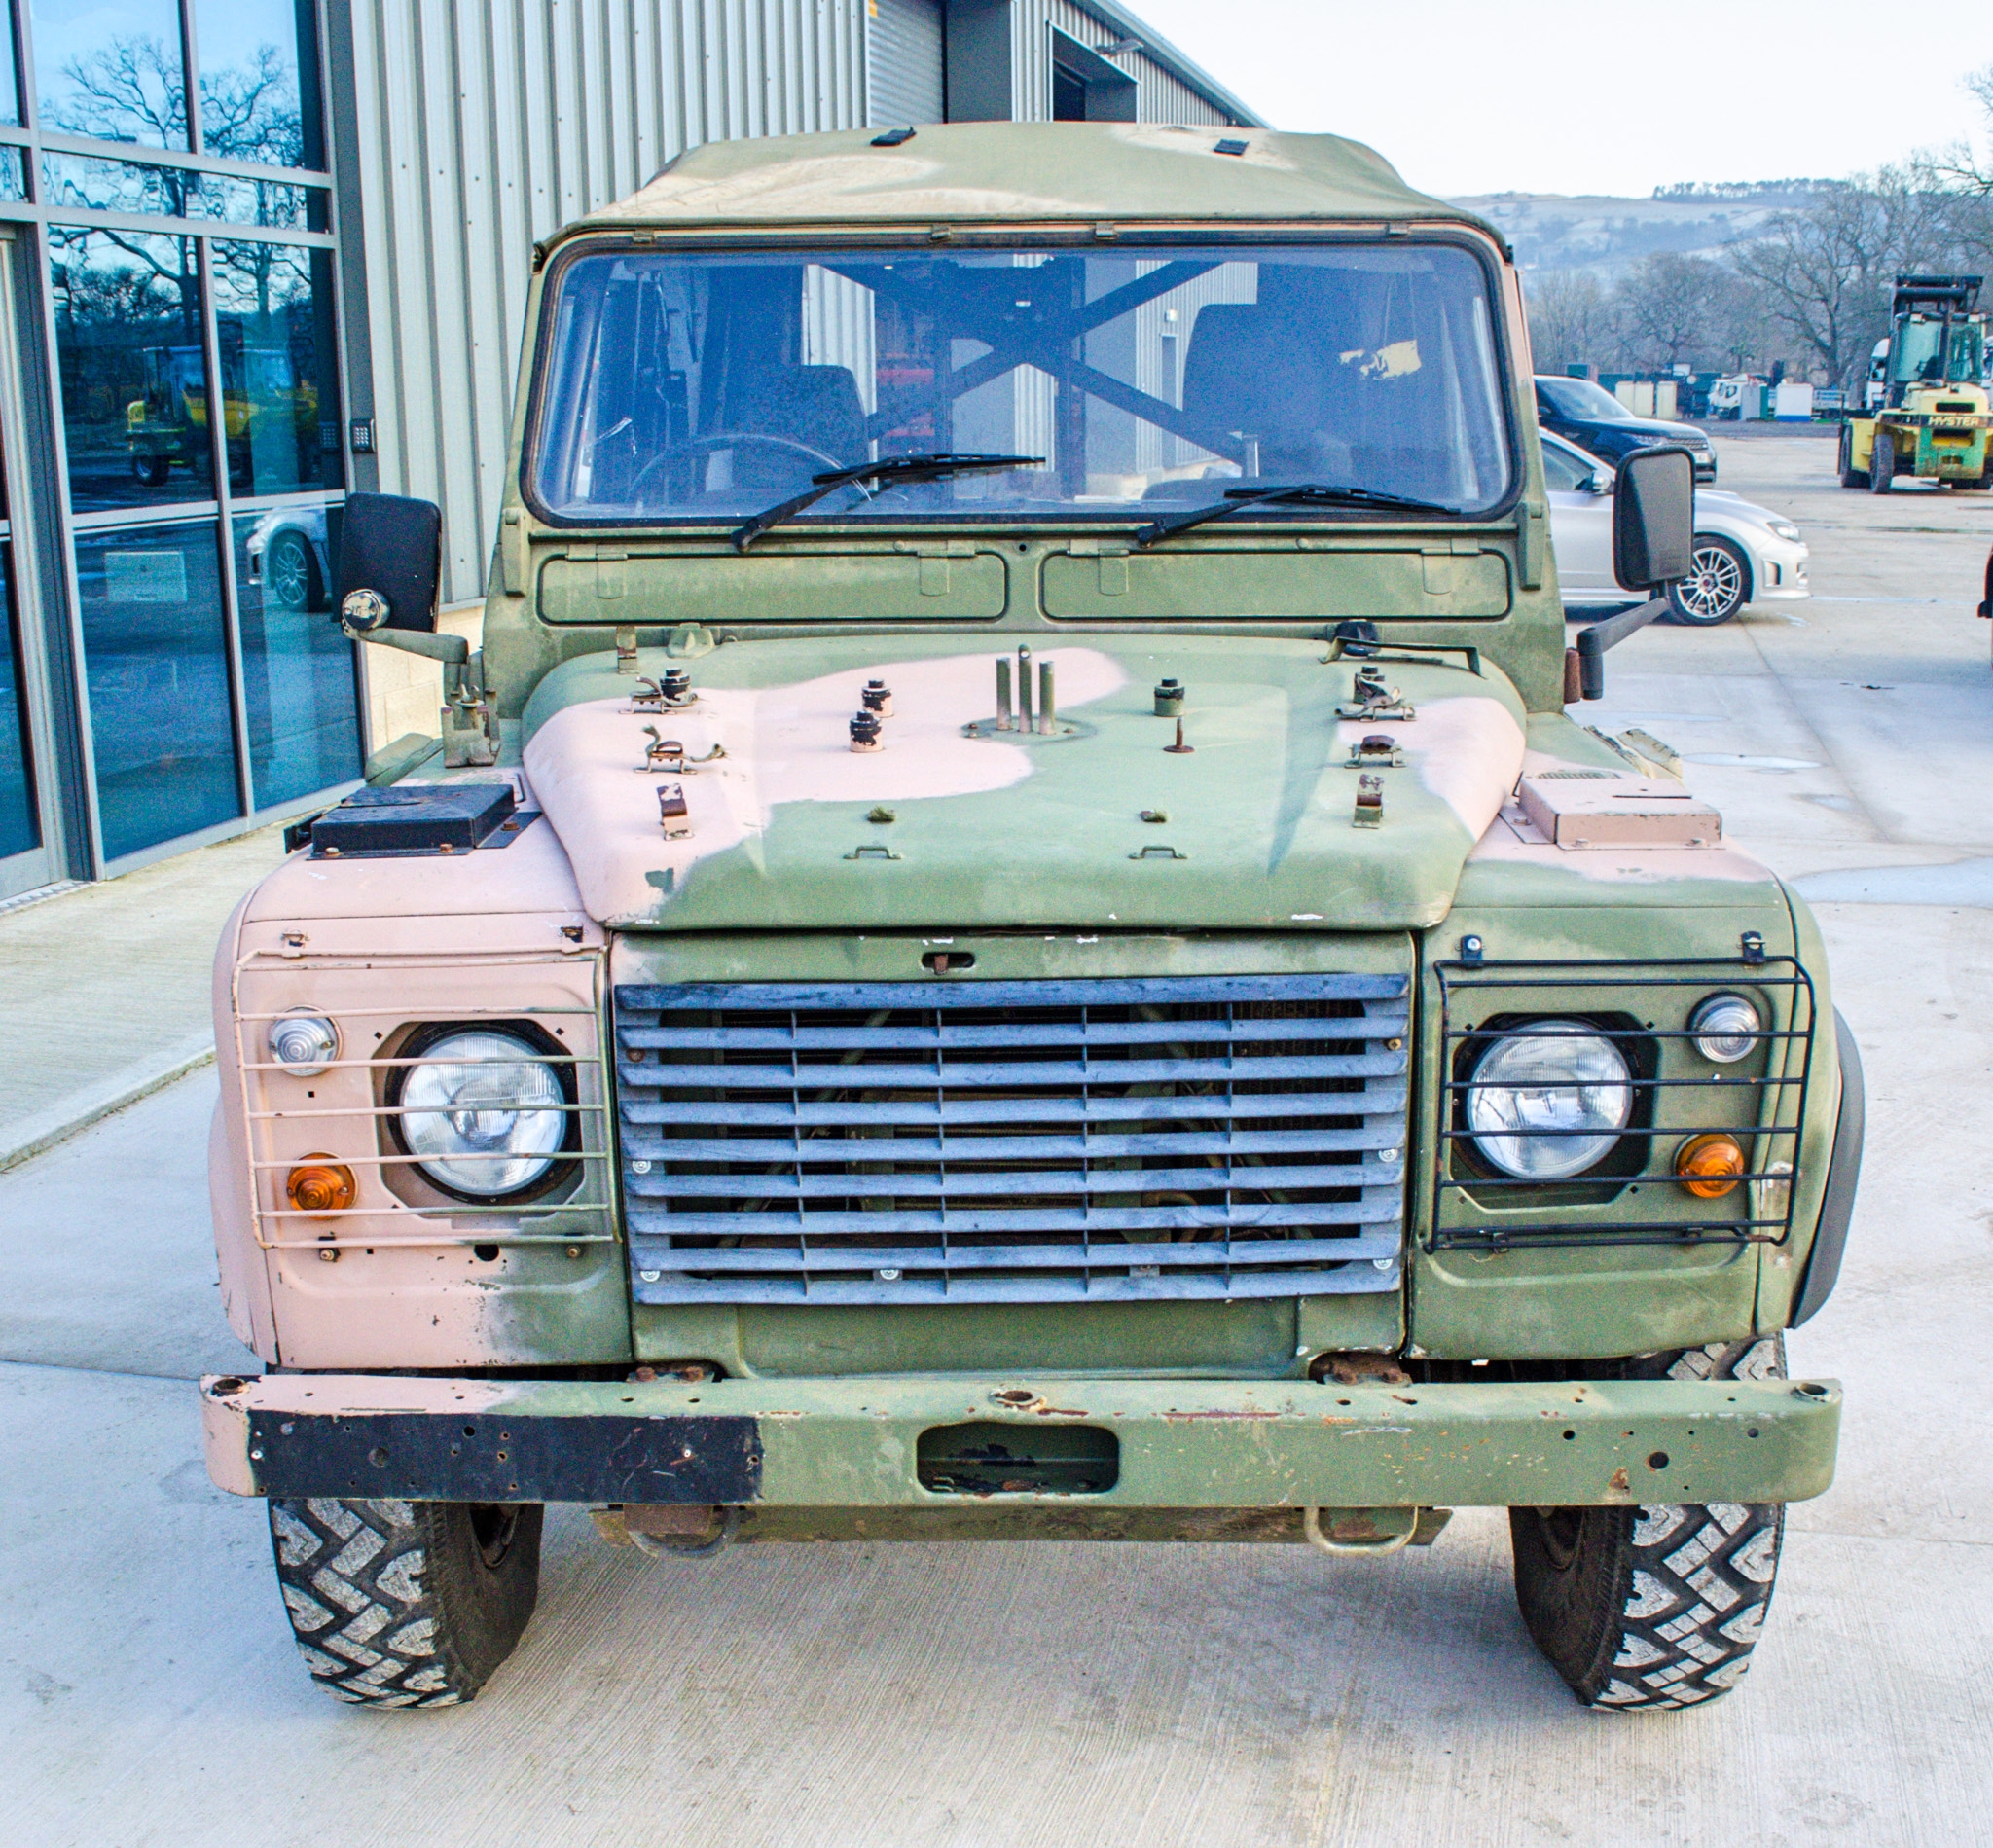 1998 Land Rover Defender 90 WOLF 2,5 litre 300TDI 4 wheel drive utility vehicle Ex MOD - Image 10 of 44